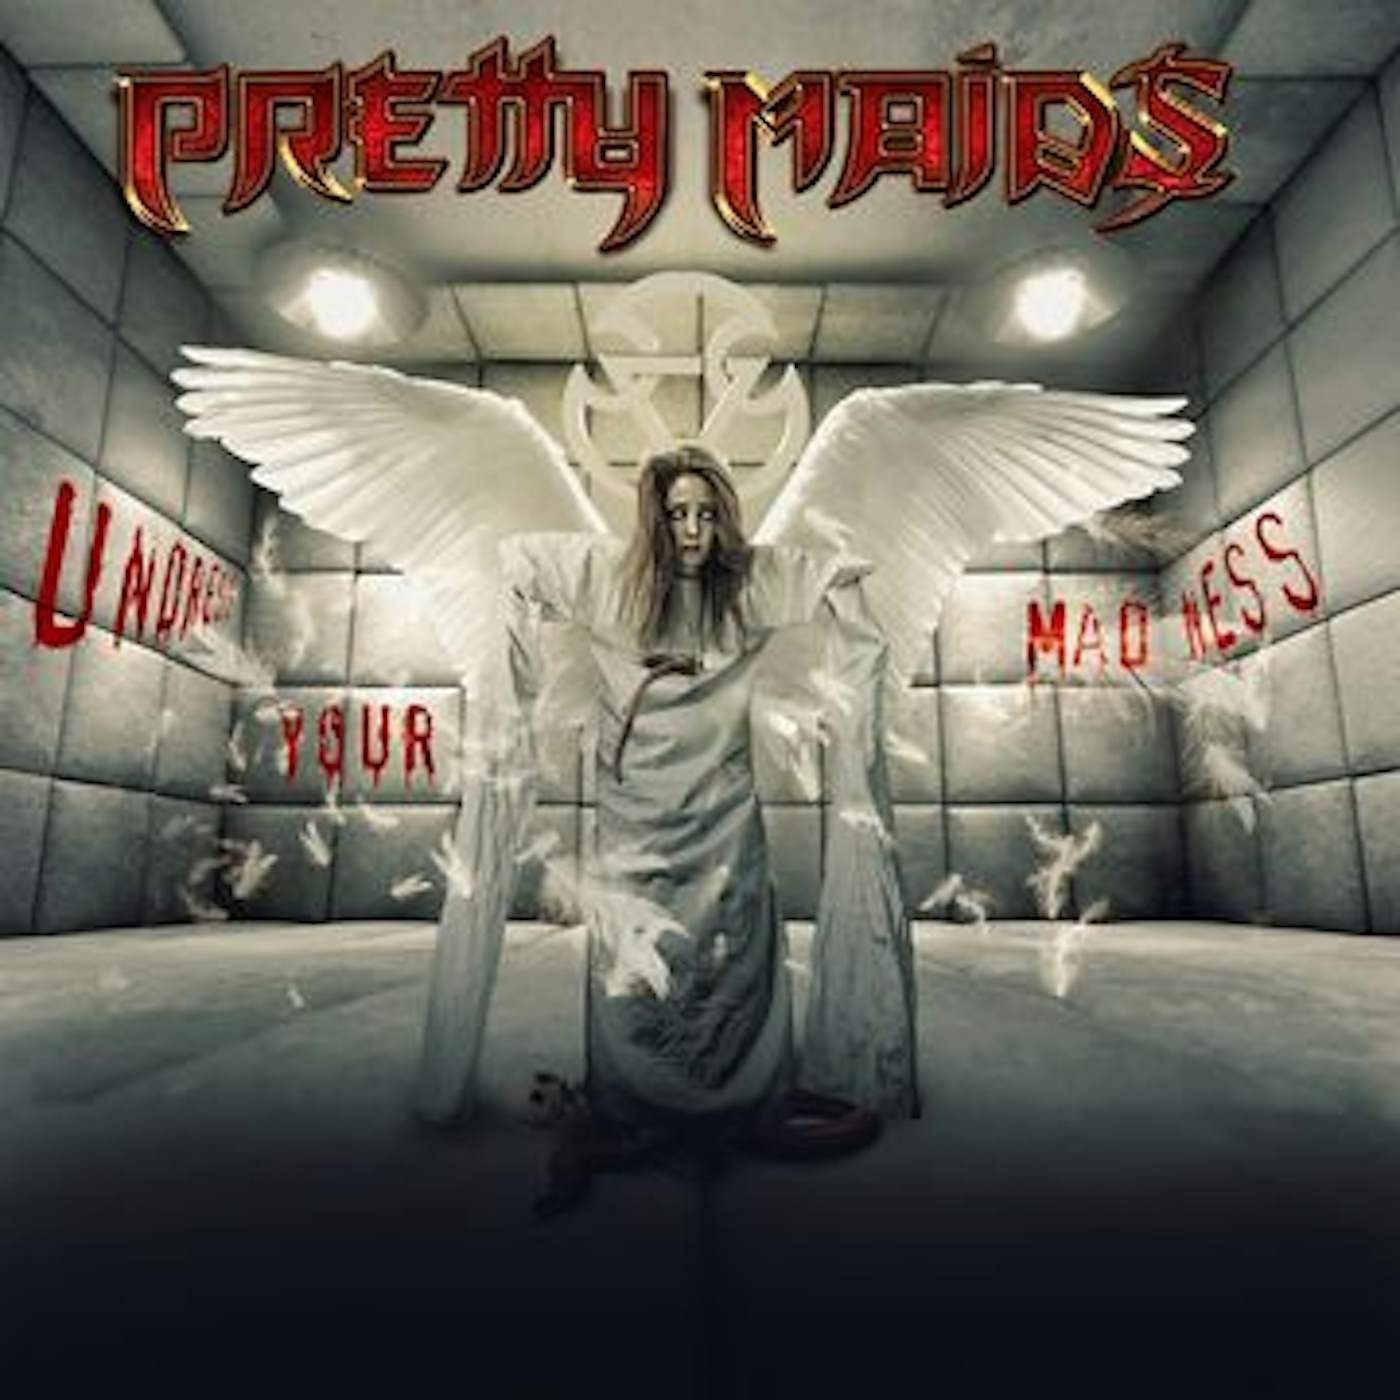 Pretty Maids Undress your madness Vinyl Record